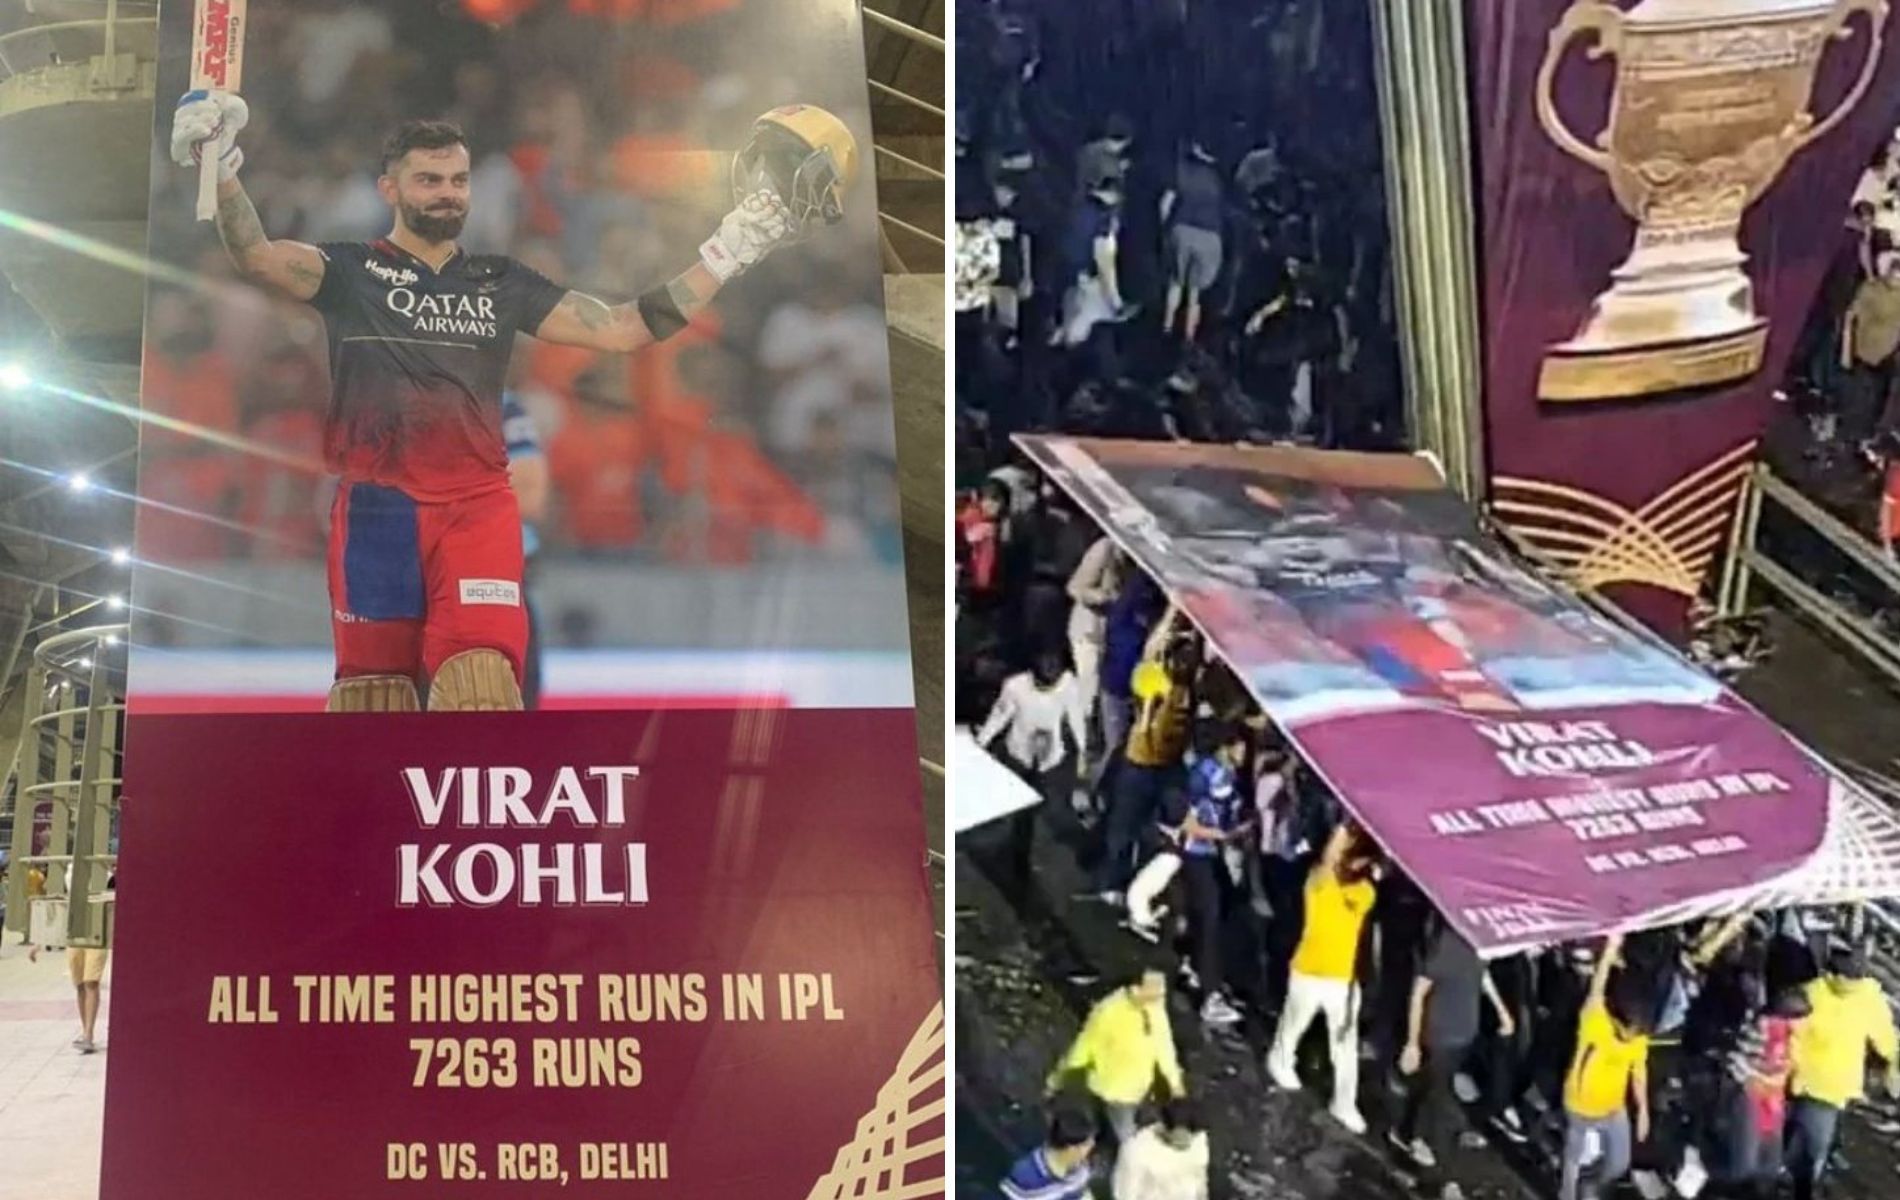 Fans chanted for Virat Kohli while taking shelter under his poster. (Pics: Twitter)